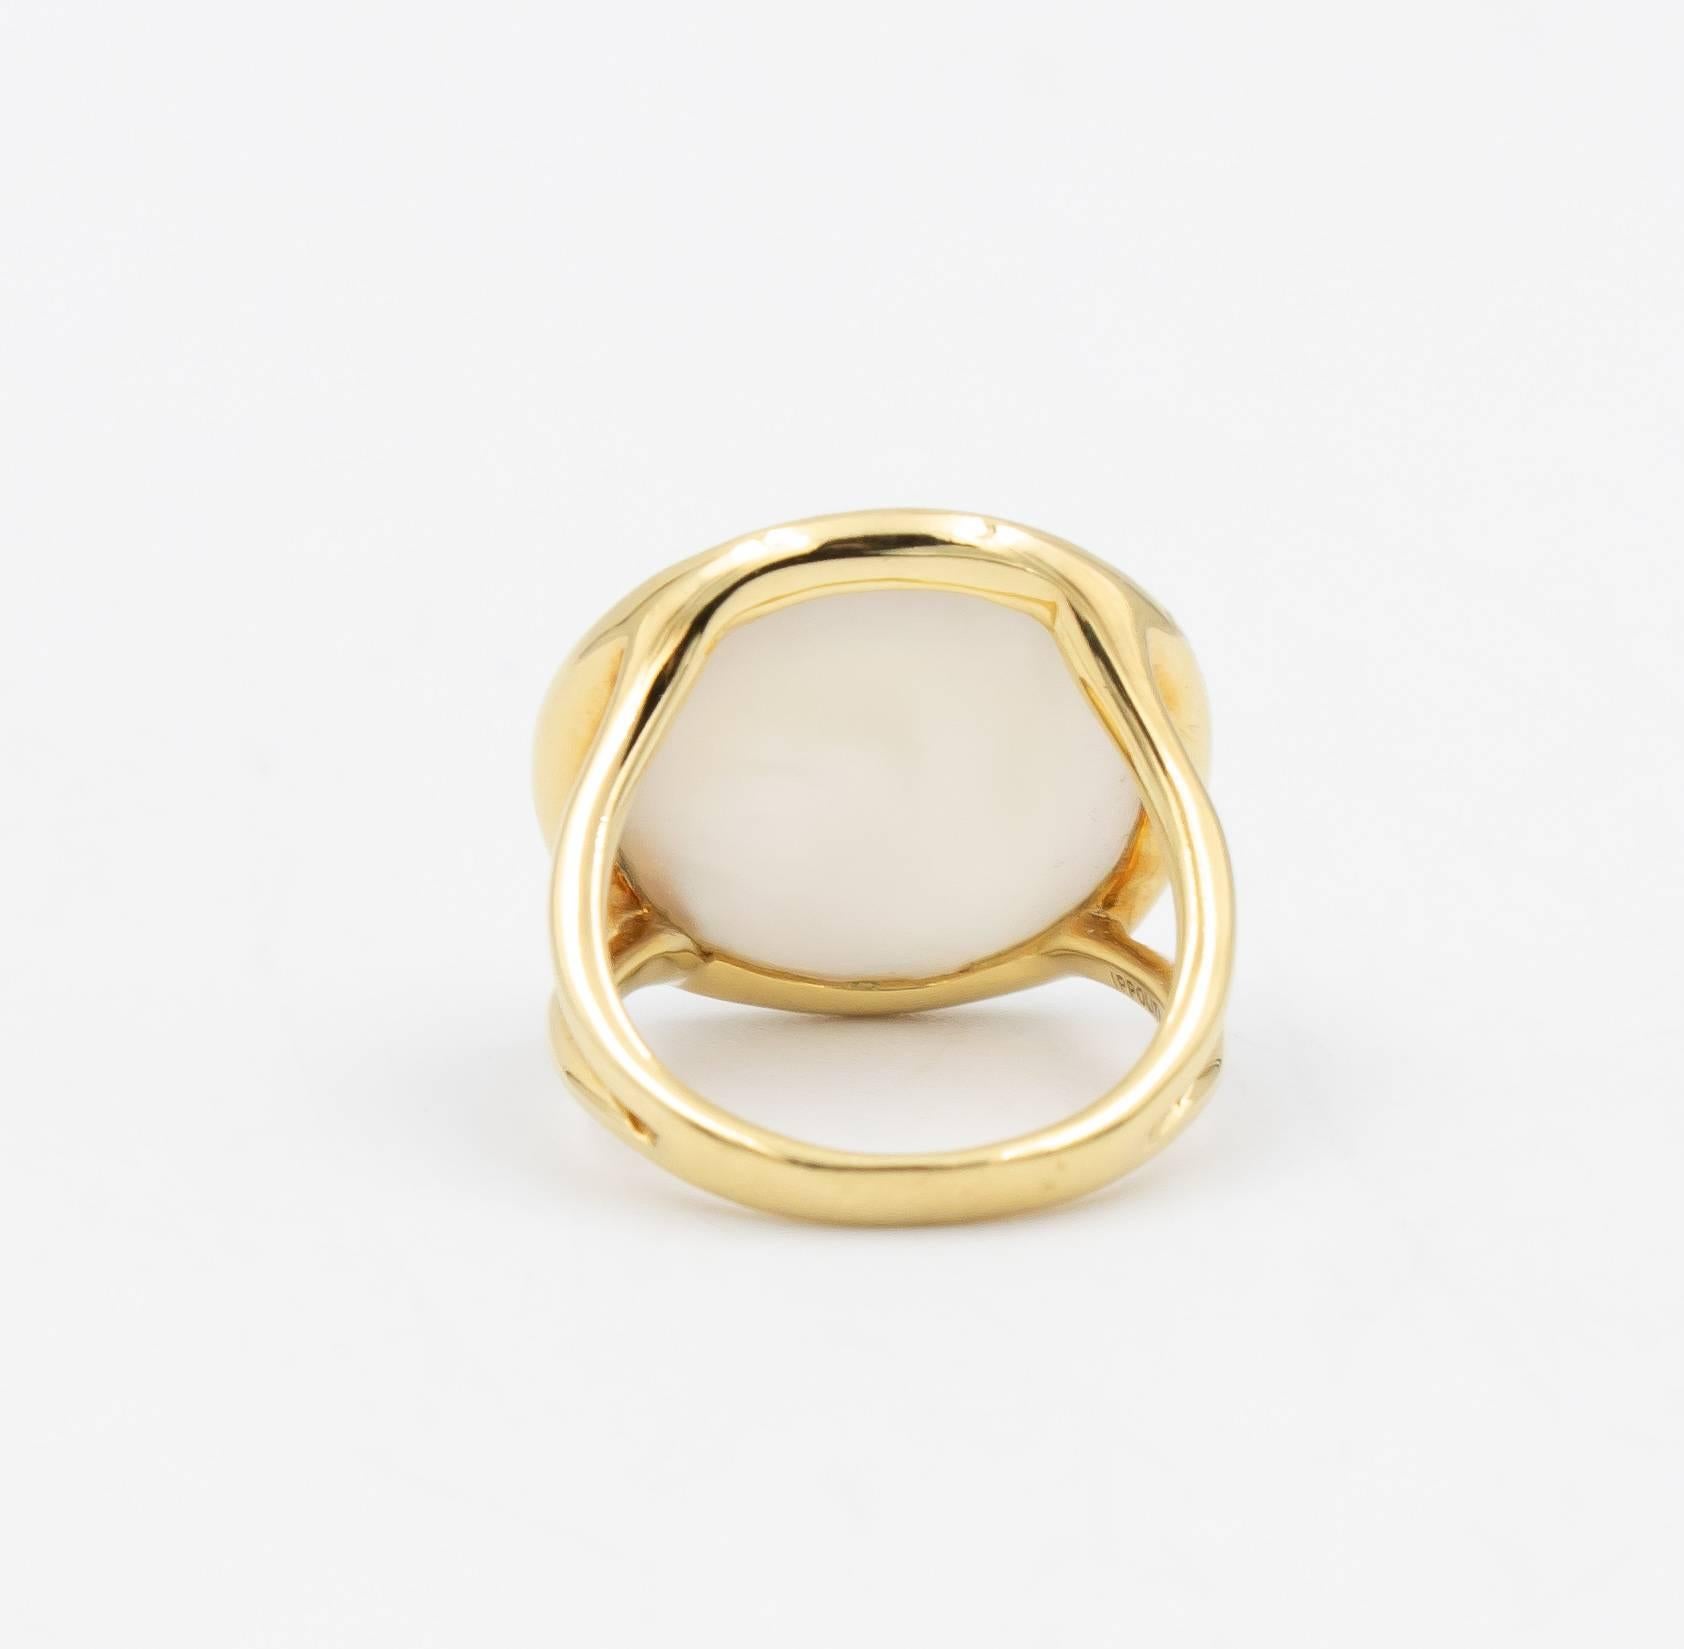 Women's Ippolita Lollipop Ring in 18 Karat Gold with Diamonds and Mother-of-Pearl